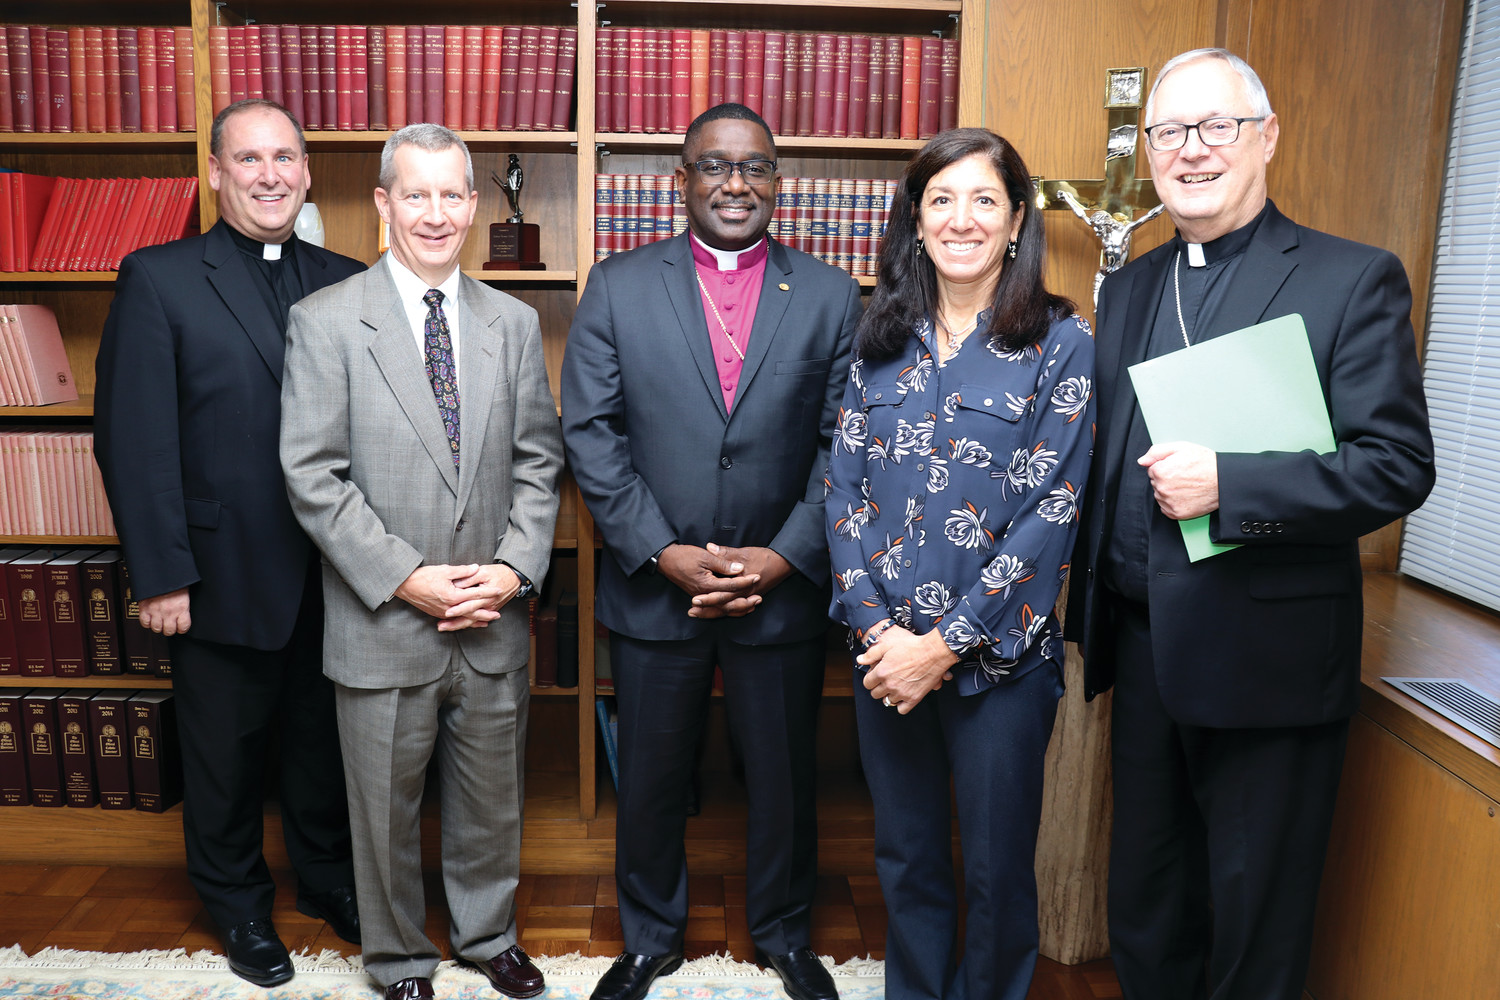 Bishop Thomas J. Tobin, right, and Msgr. Albert A. Kenney, vicar general and moderator of the curia, welcome Judge Stephen Isherwood, Bishop Jeffrey A. Williams and Karen Pinch to the Diocesan Advisory Board for the Protection of Children and Young People.